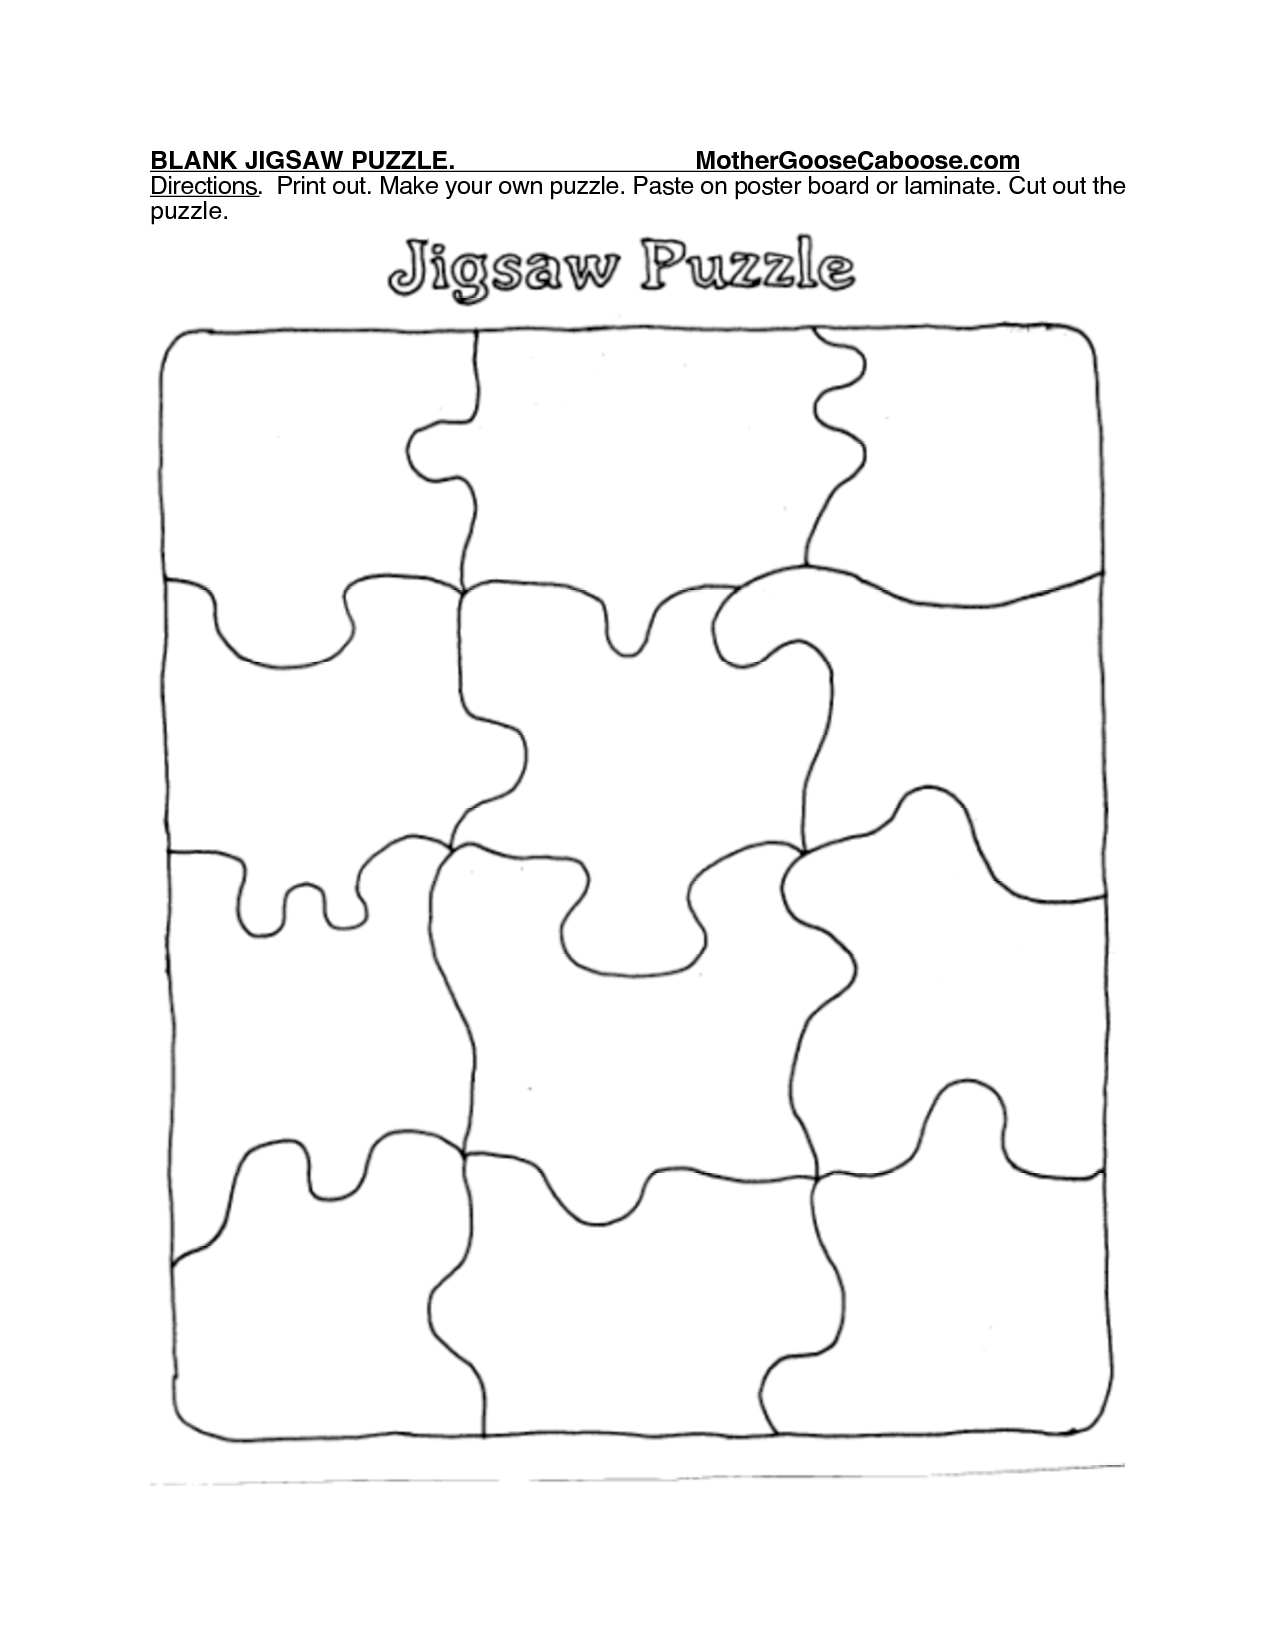 Blank Jigsaw Puzzle. Mothergoosecaboose Directions. Print Out - Print Jigsaw Puzzle